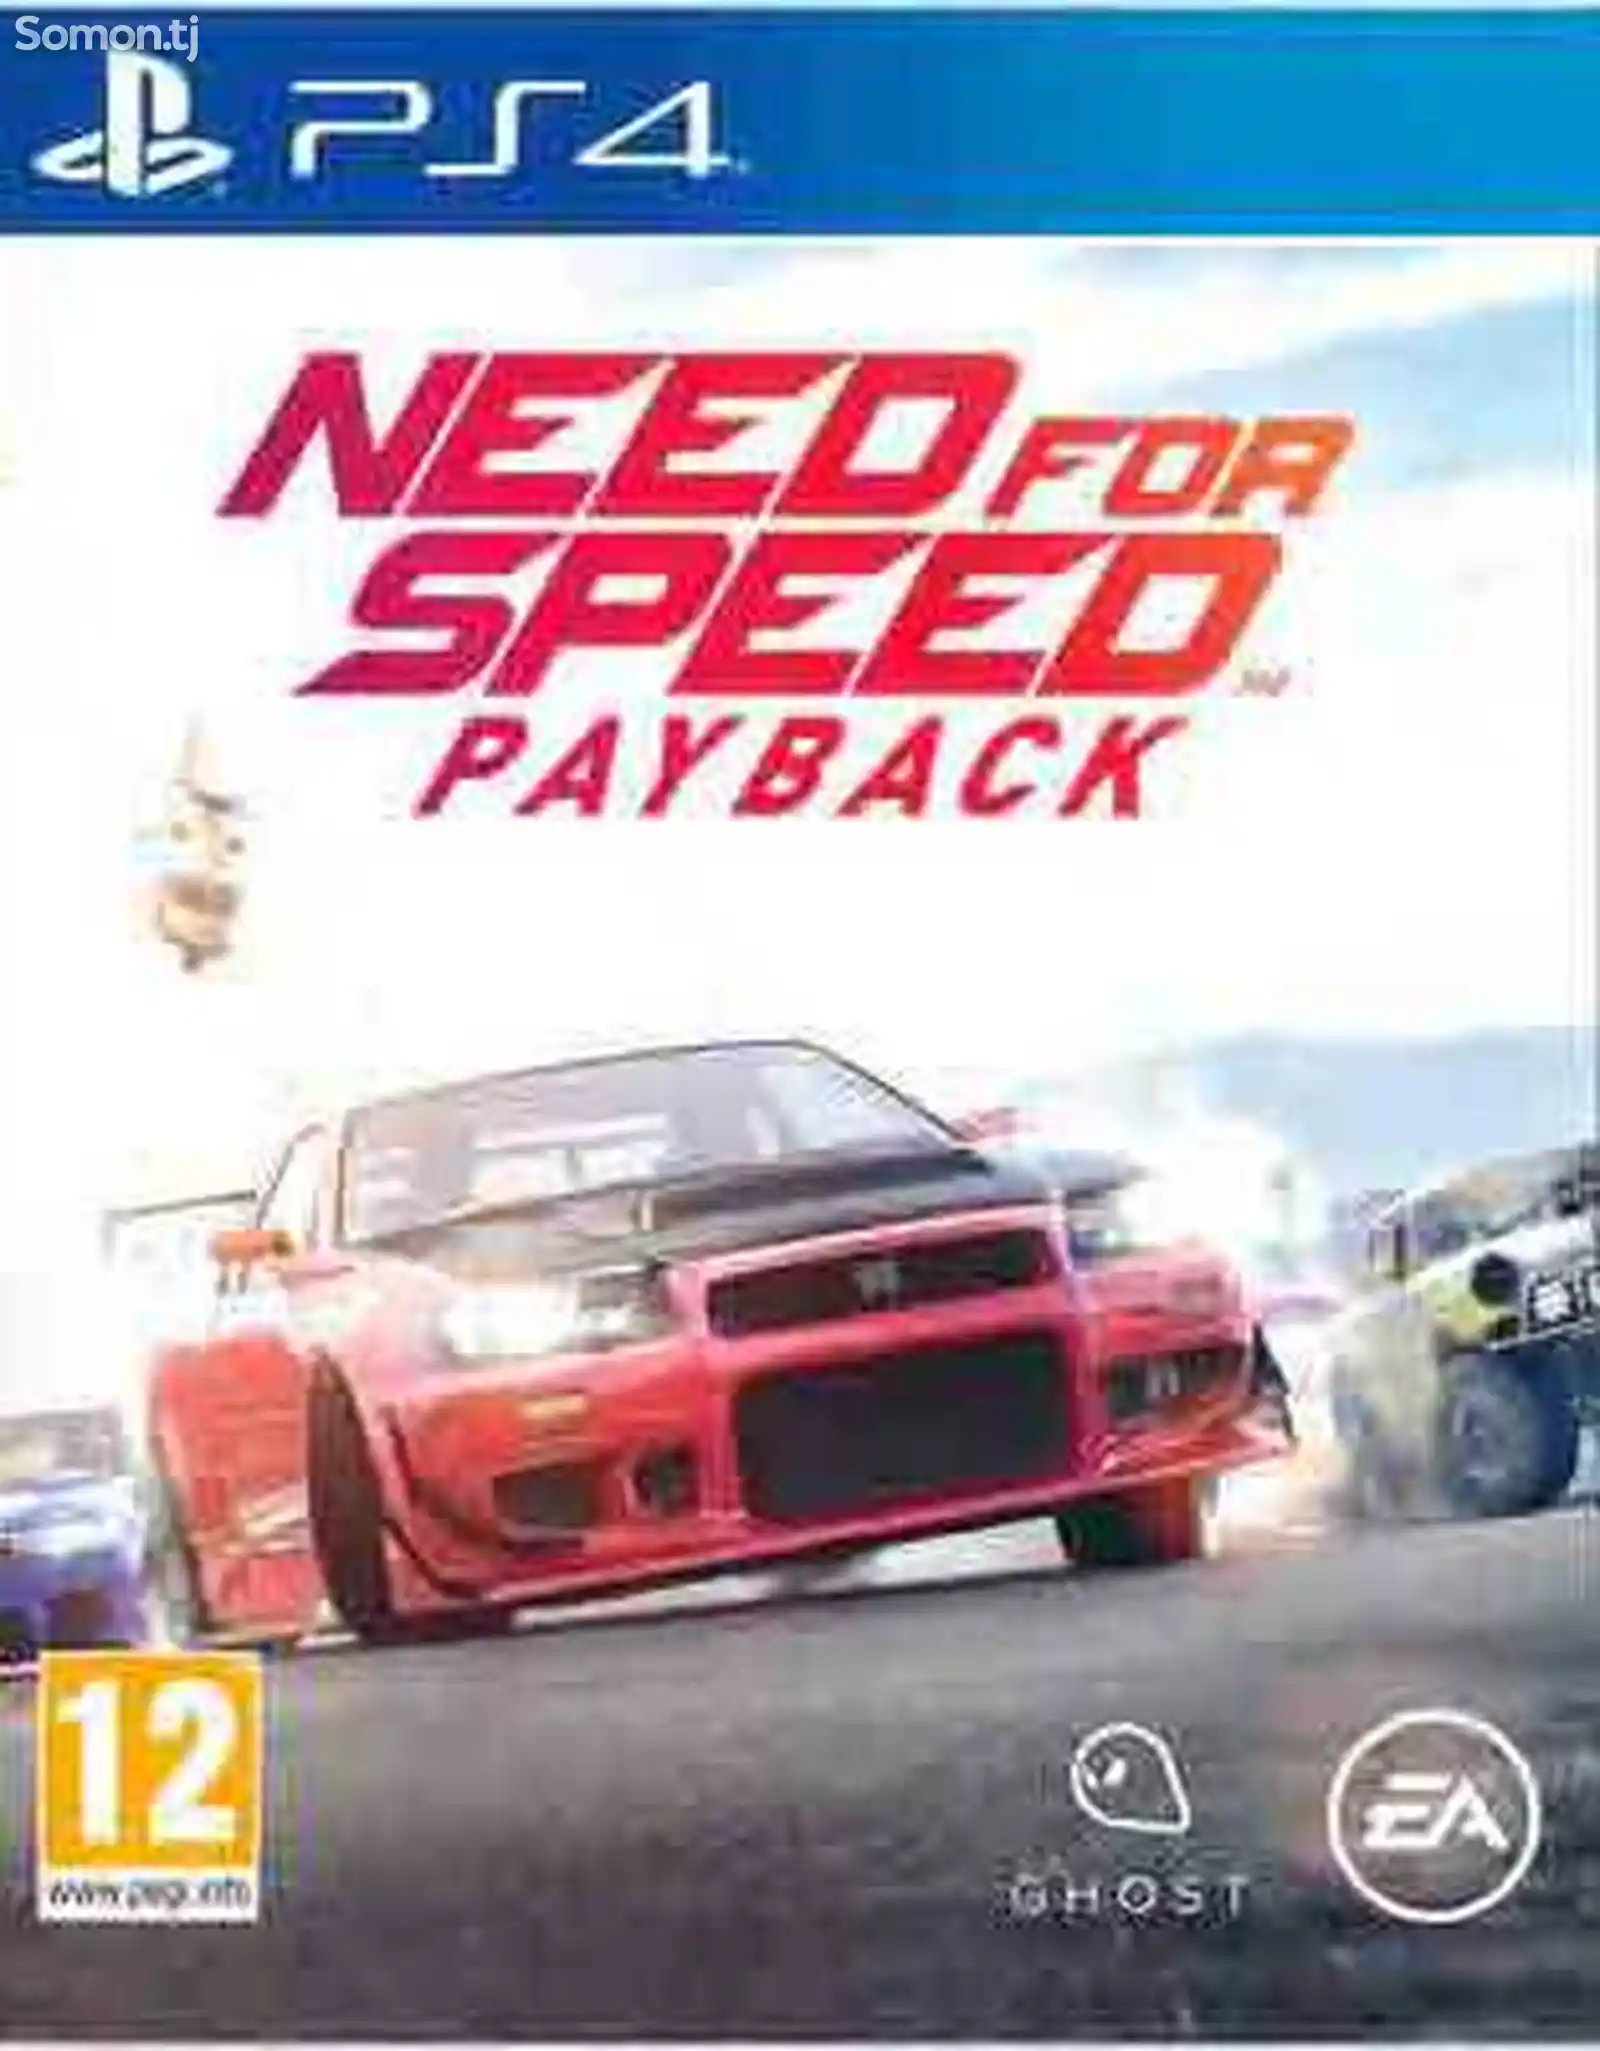 Игра Need for speed-Payback для PS-4 / 5.05 / 6.72 / 7.02 / 7.55 / 9.00 /